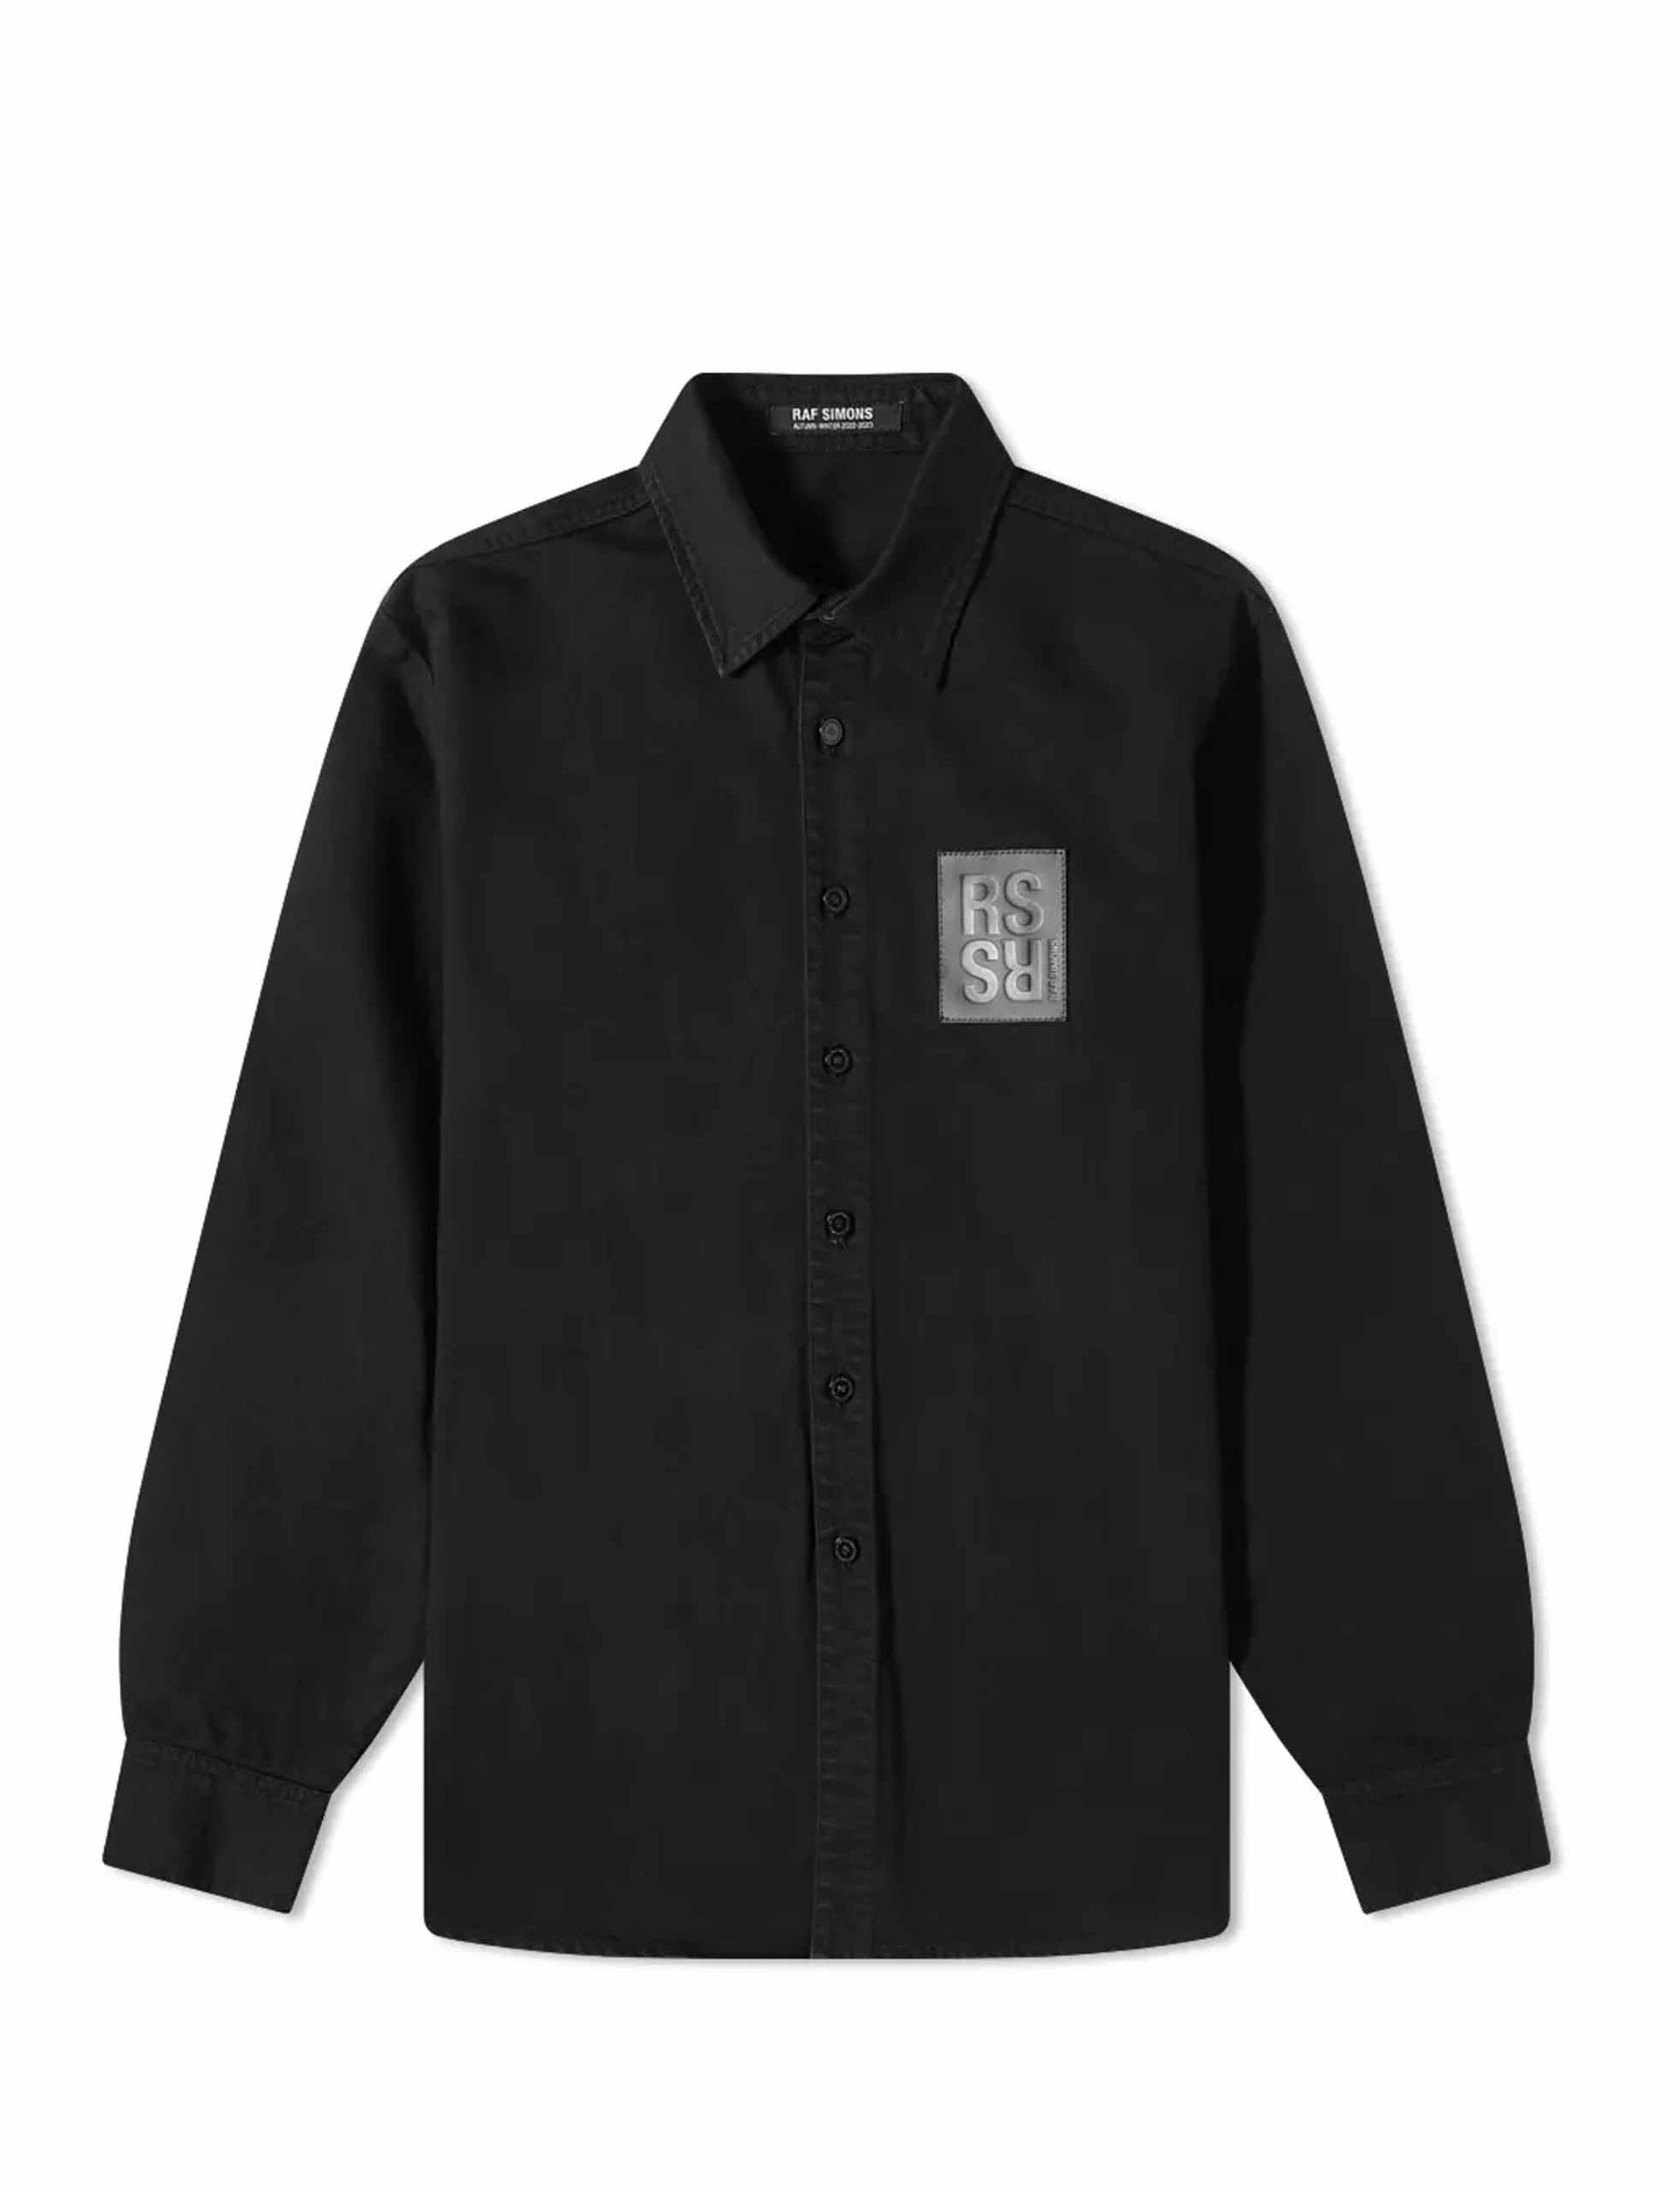 RAF SIMONS Oversized denim shirt with R pin in back